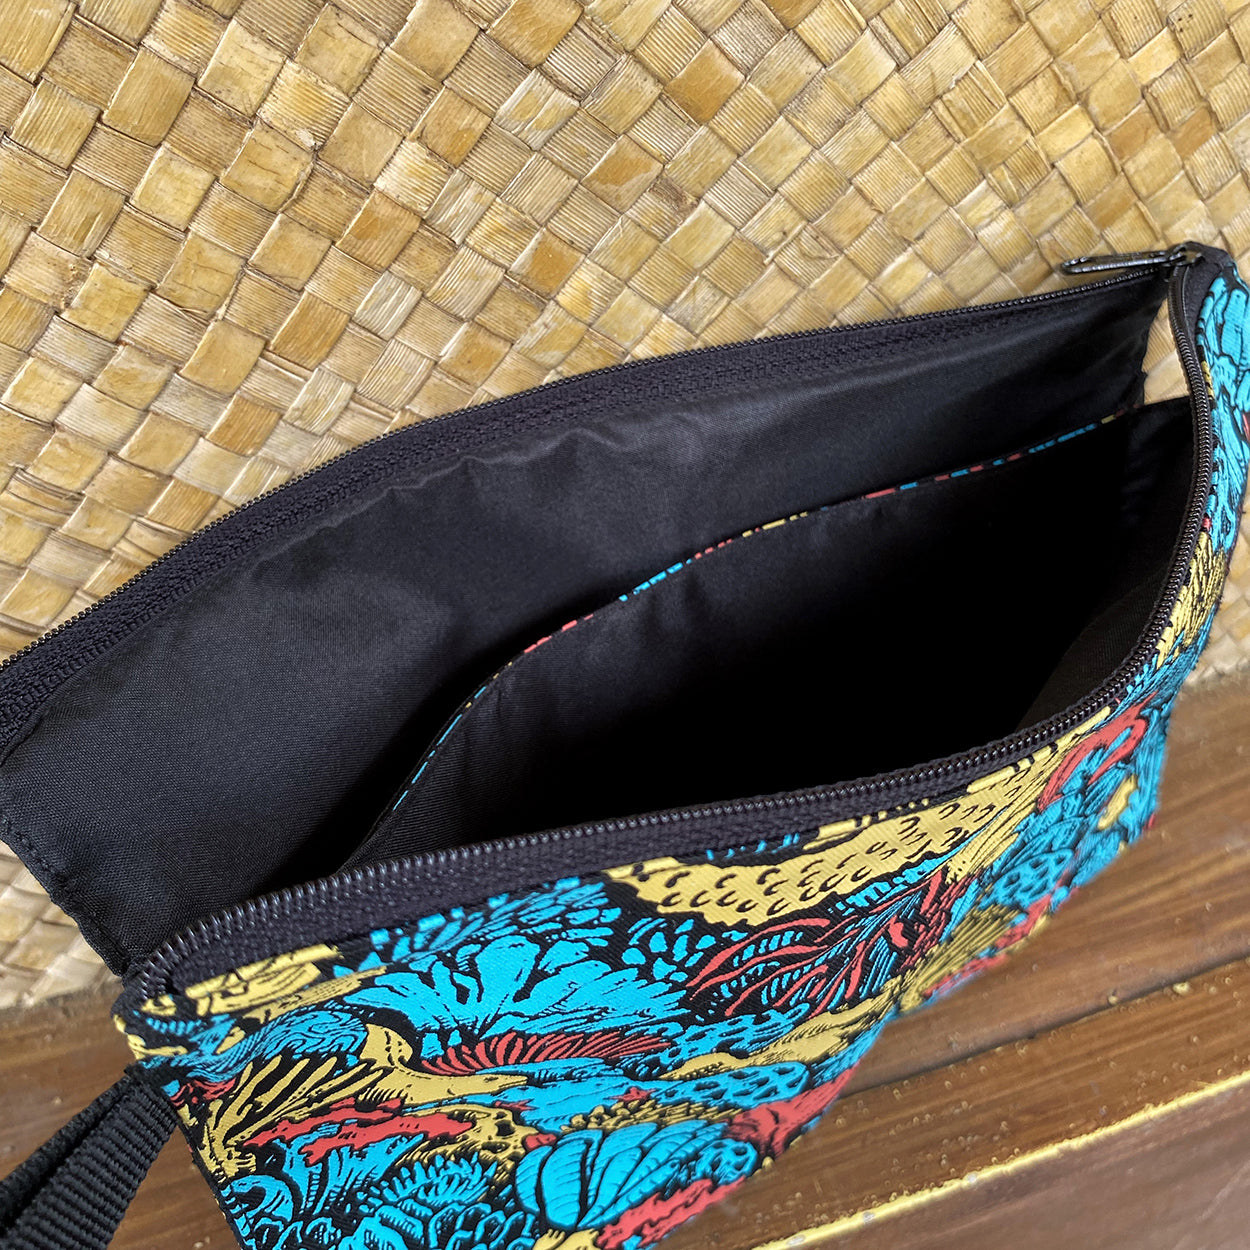 Angelo Delos Santos coral reef pattern underwater diver cosmetic bag with handle silk screen printing local made philippines gift souvenir buy support artist Dumaguete city Negros Oriental